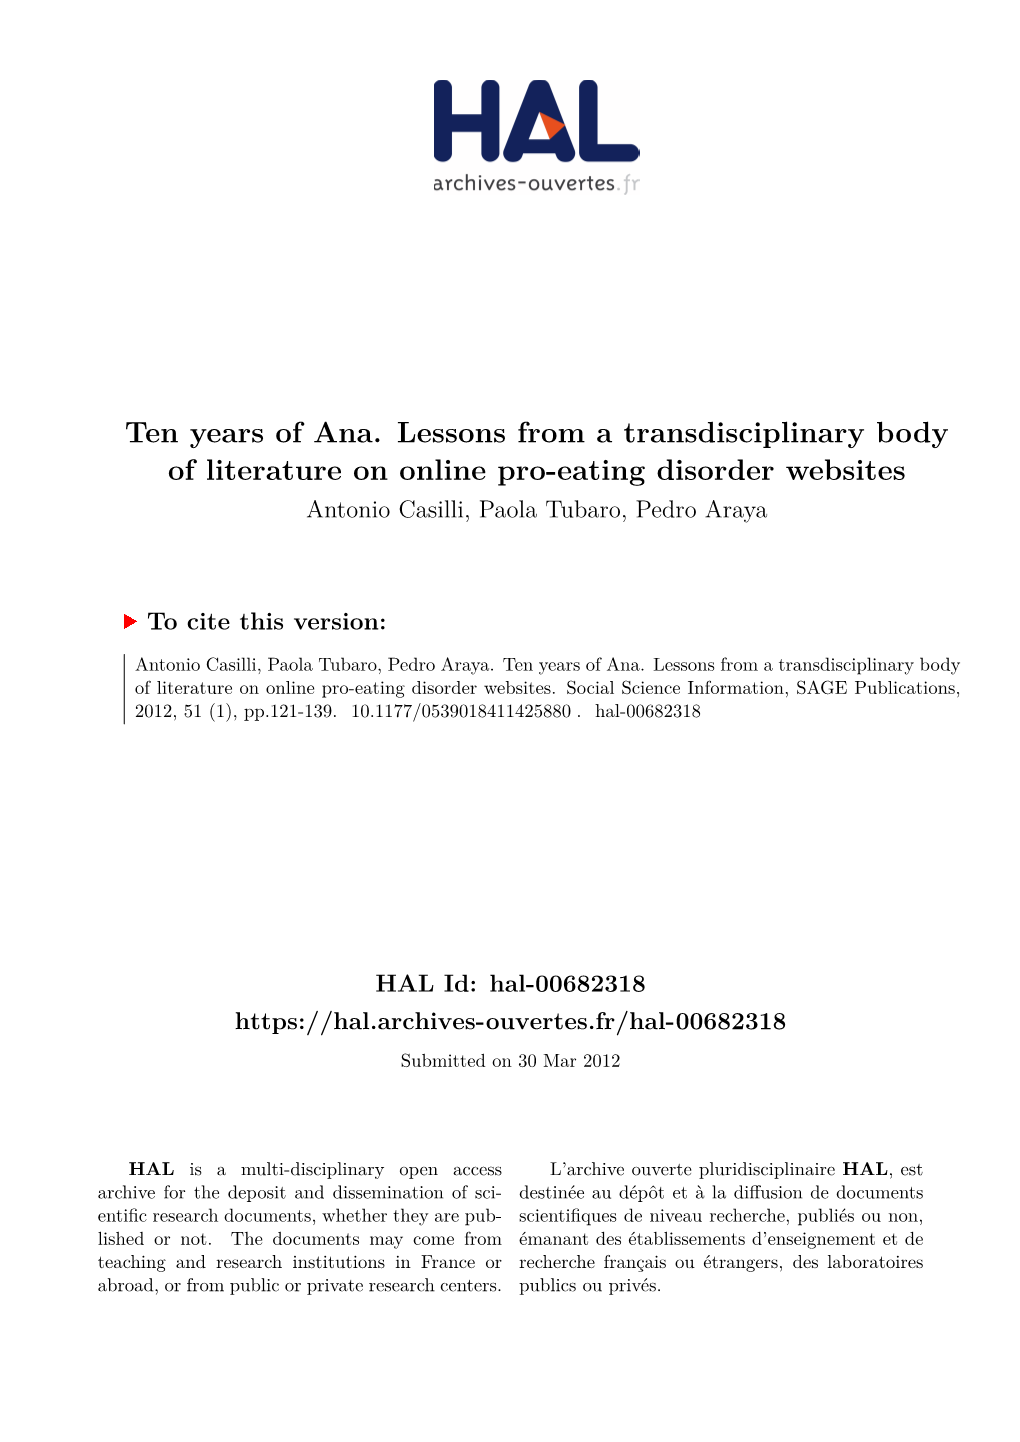 Ten Years of Ana. Lessons from a Transdisciplinary Body of Literature on Online Pro-Eating Disorder Websites Antonio Casilli, Paola Tubaro, Pedro Araya